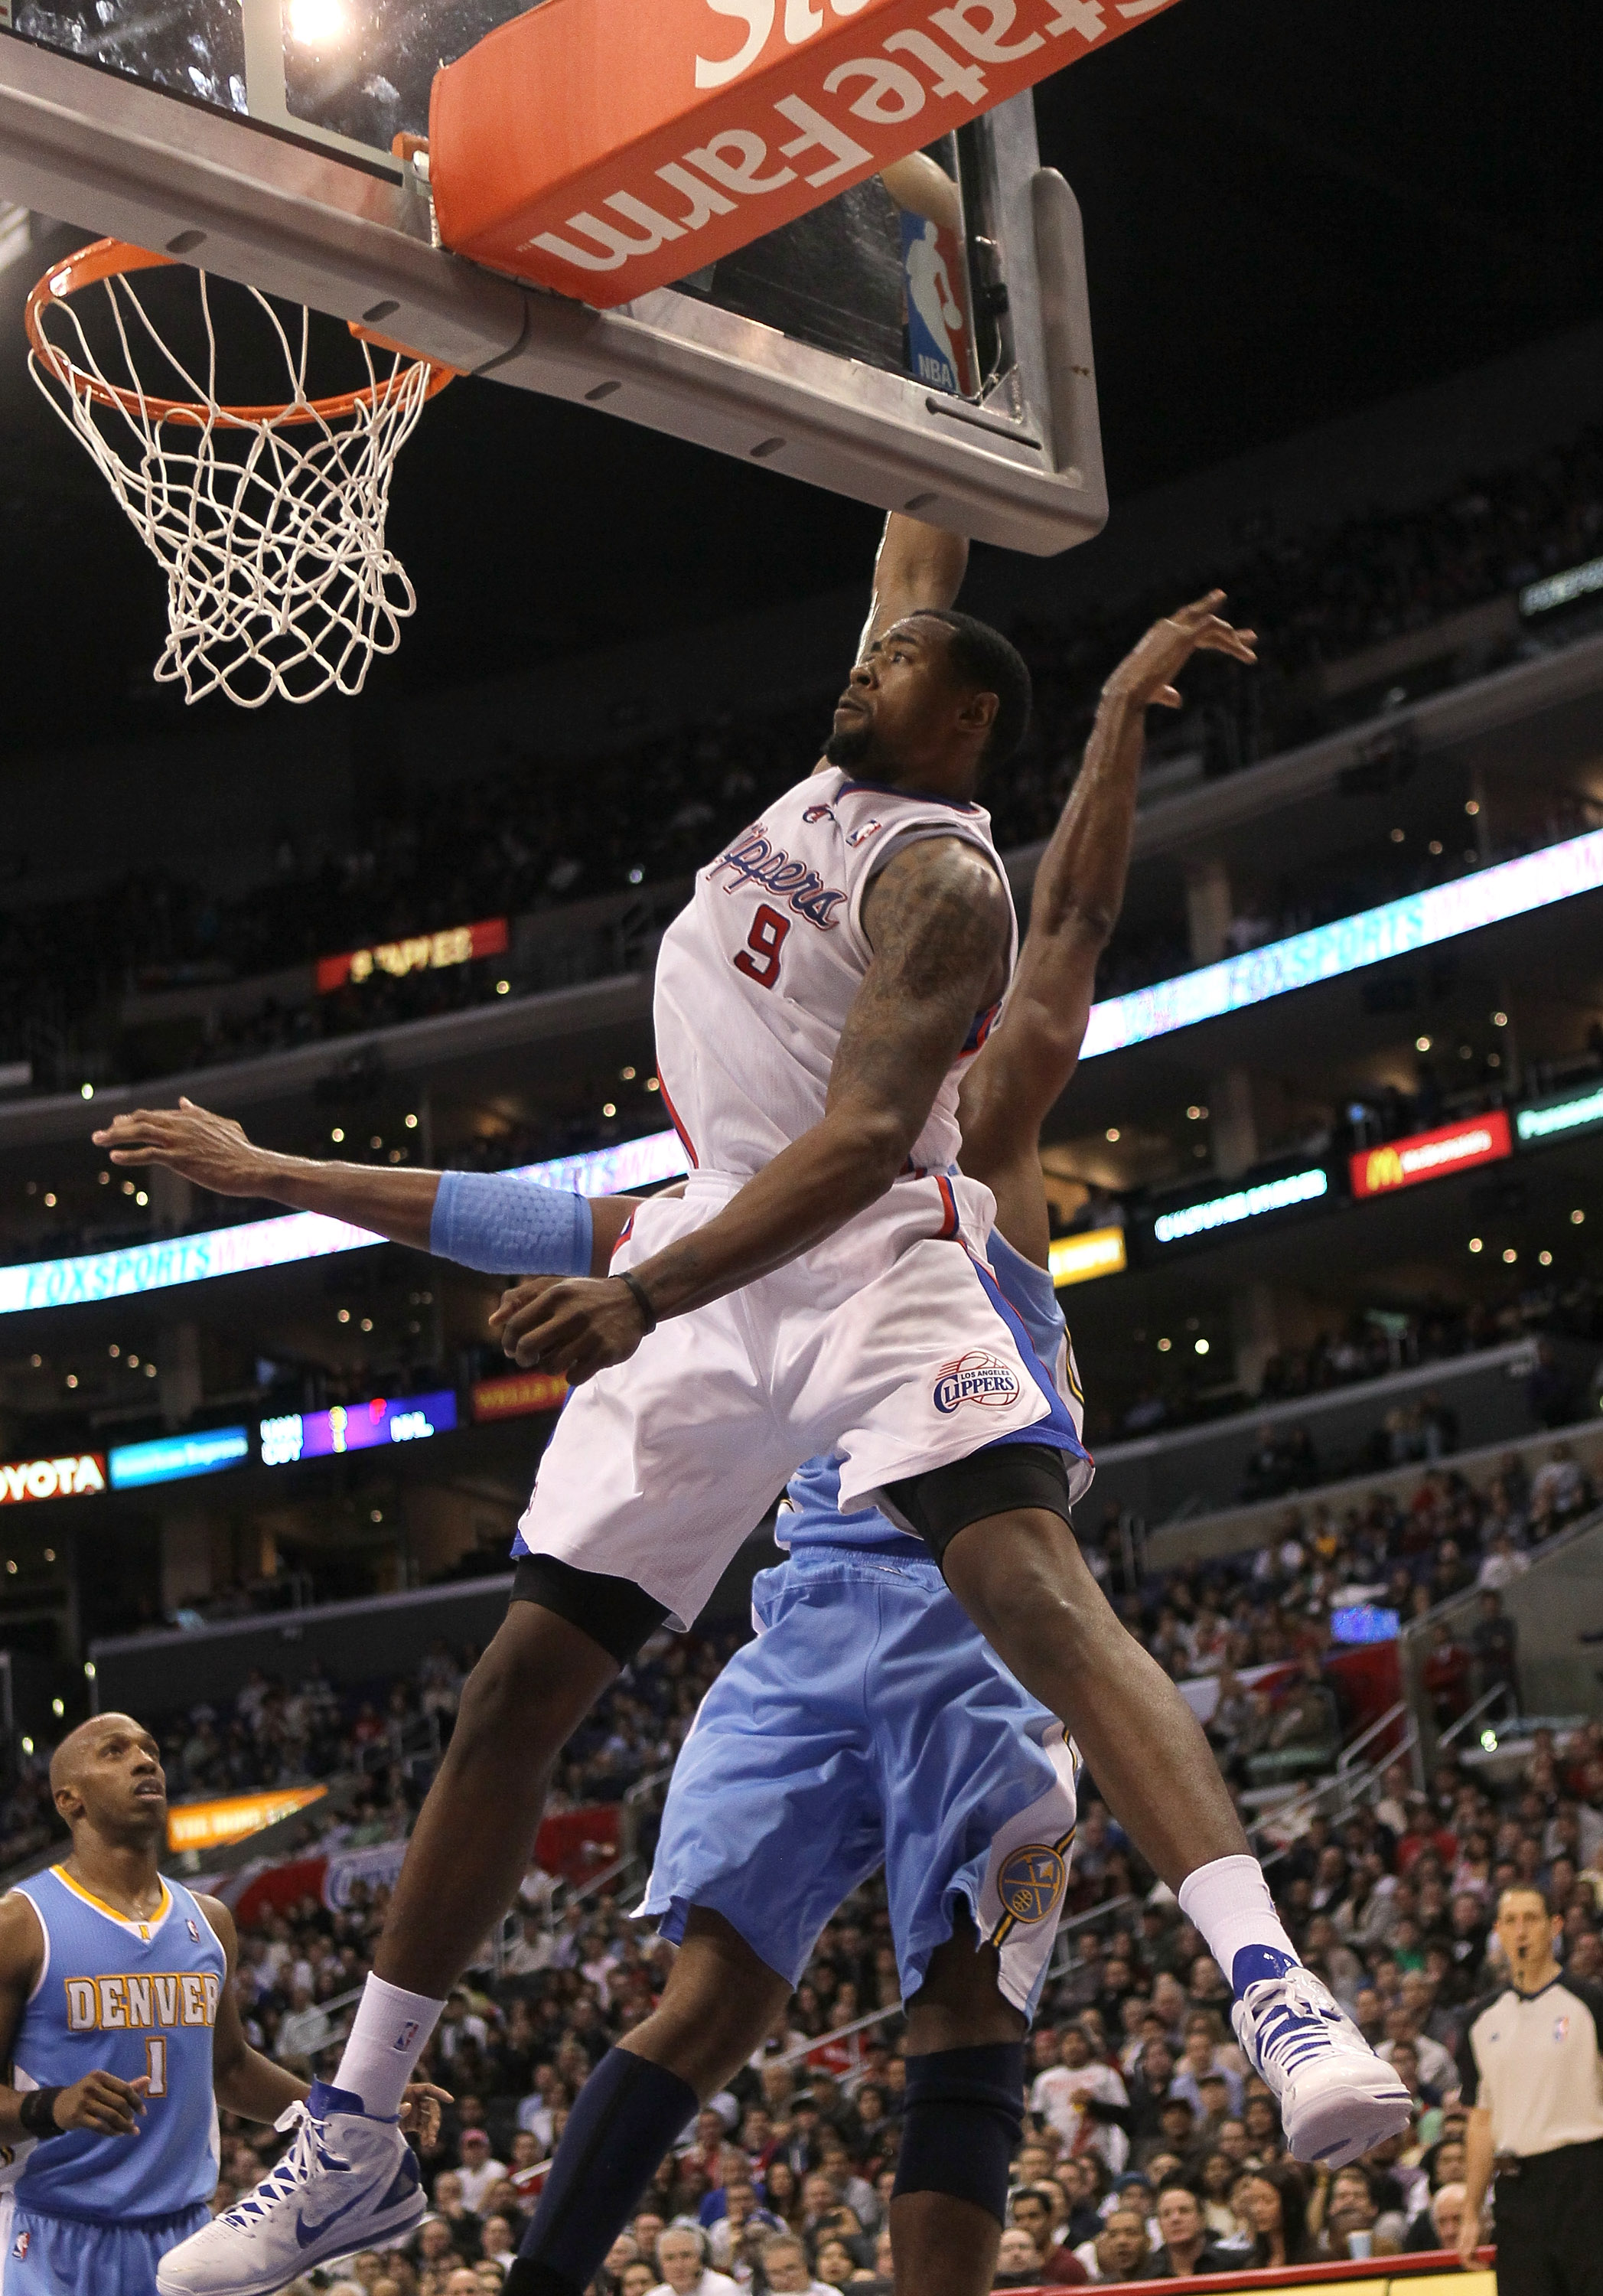 LOS ANGELES, CA - JANUARY 5:  DeAndre Jordan #9 of the Los Angeles Clippers makes an alley oop dunk against the Denver Nuggets at Staples Center on January 5, 2011  in Los Angeles, California. The Clippers won 106-93.  NOTE TO USER: User expressly acknowl